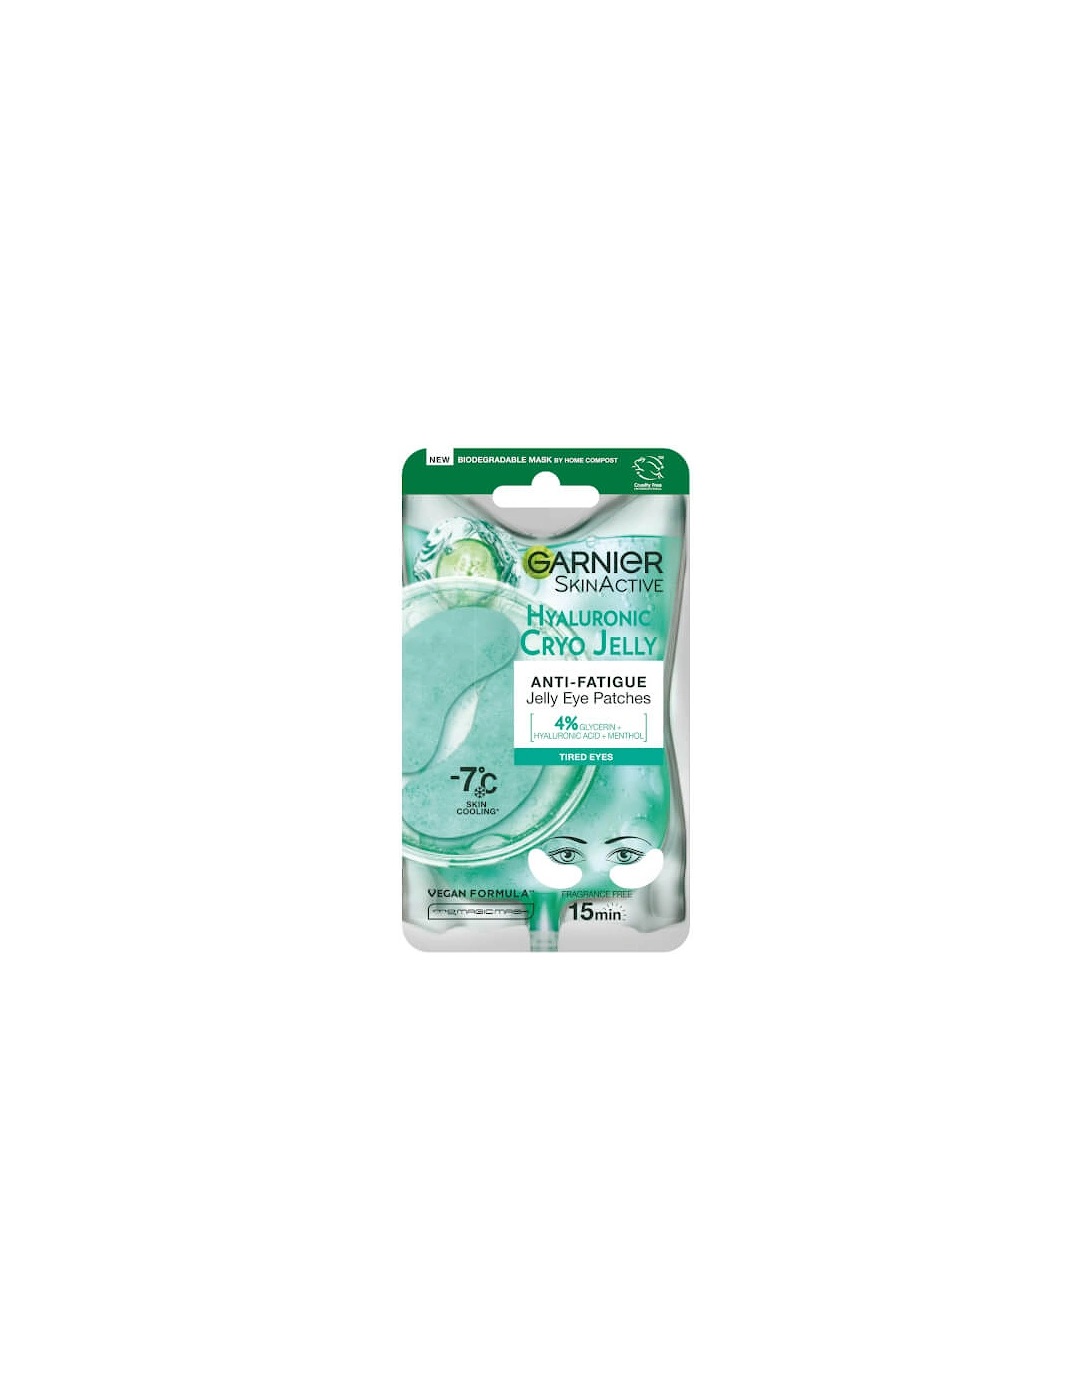 Anti-Fatigue Hyaluronic Acid and Icy Cucumber Cryo Jelly Eye Patches, 2 of 1